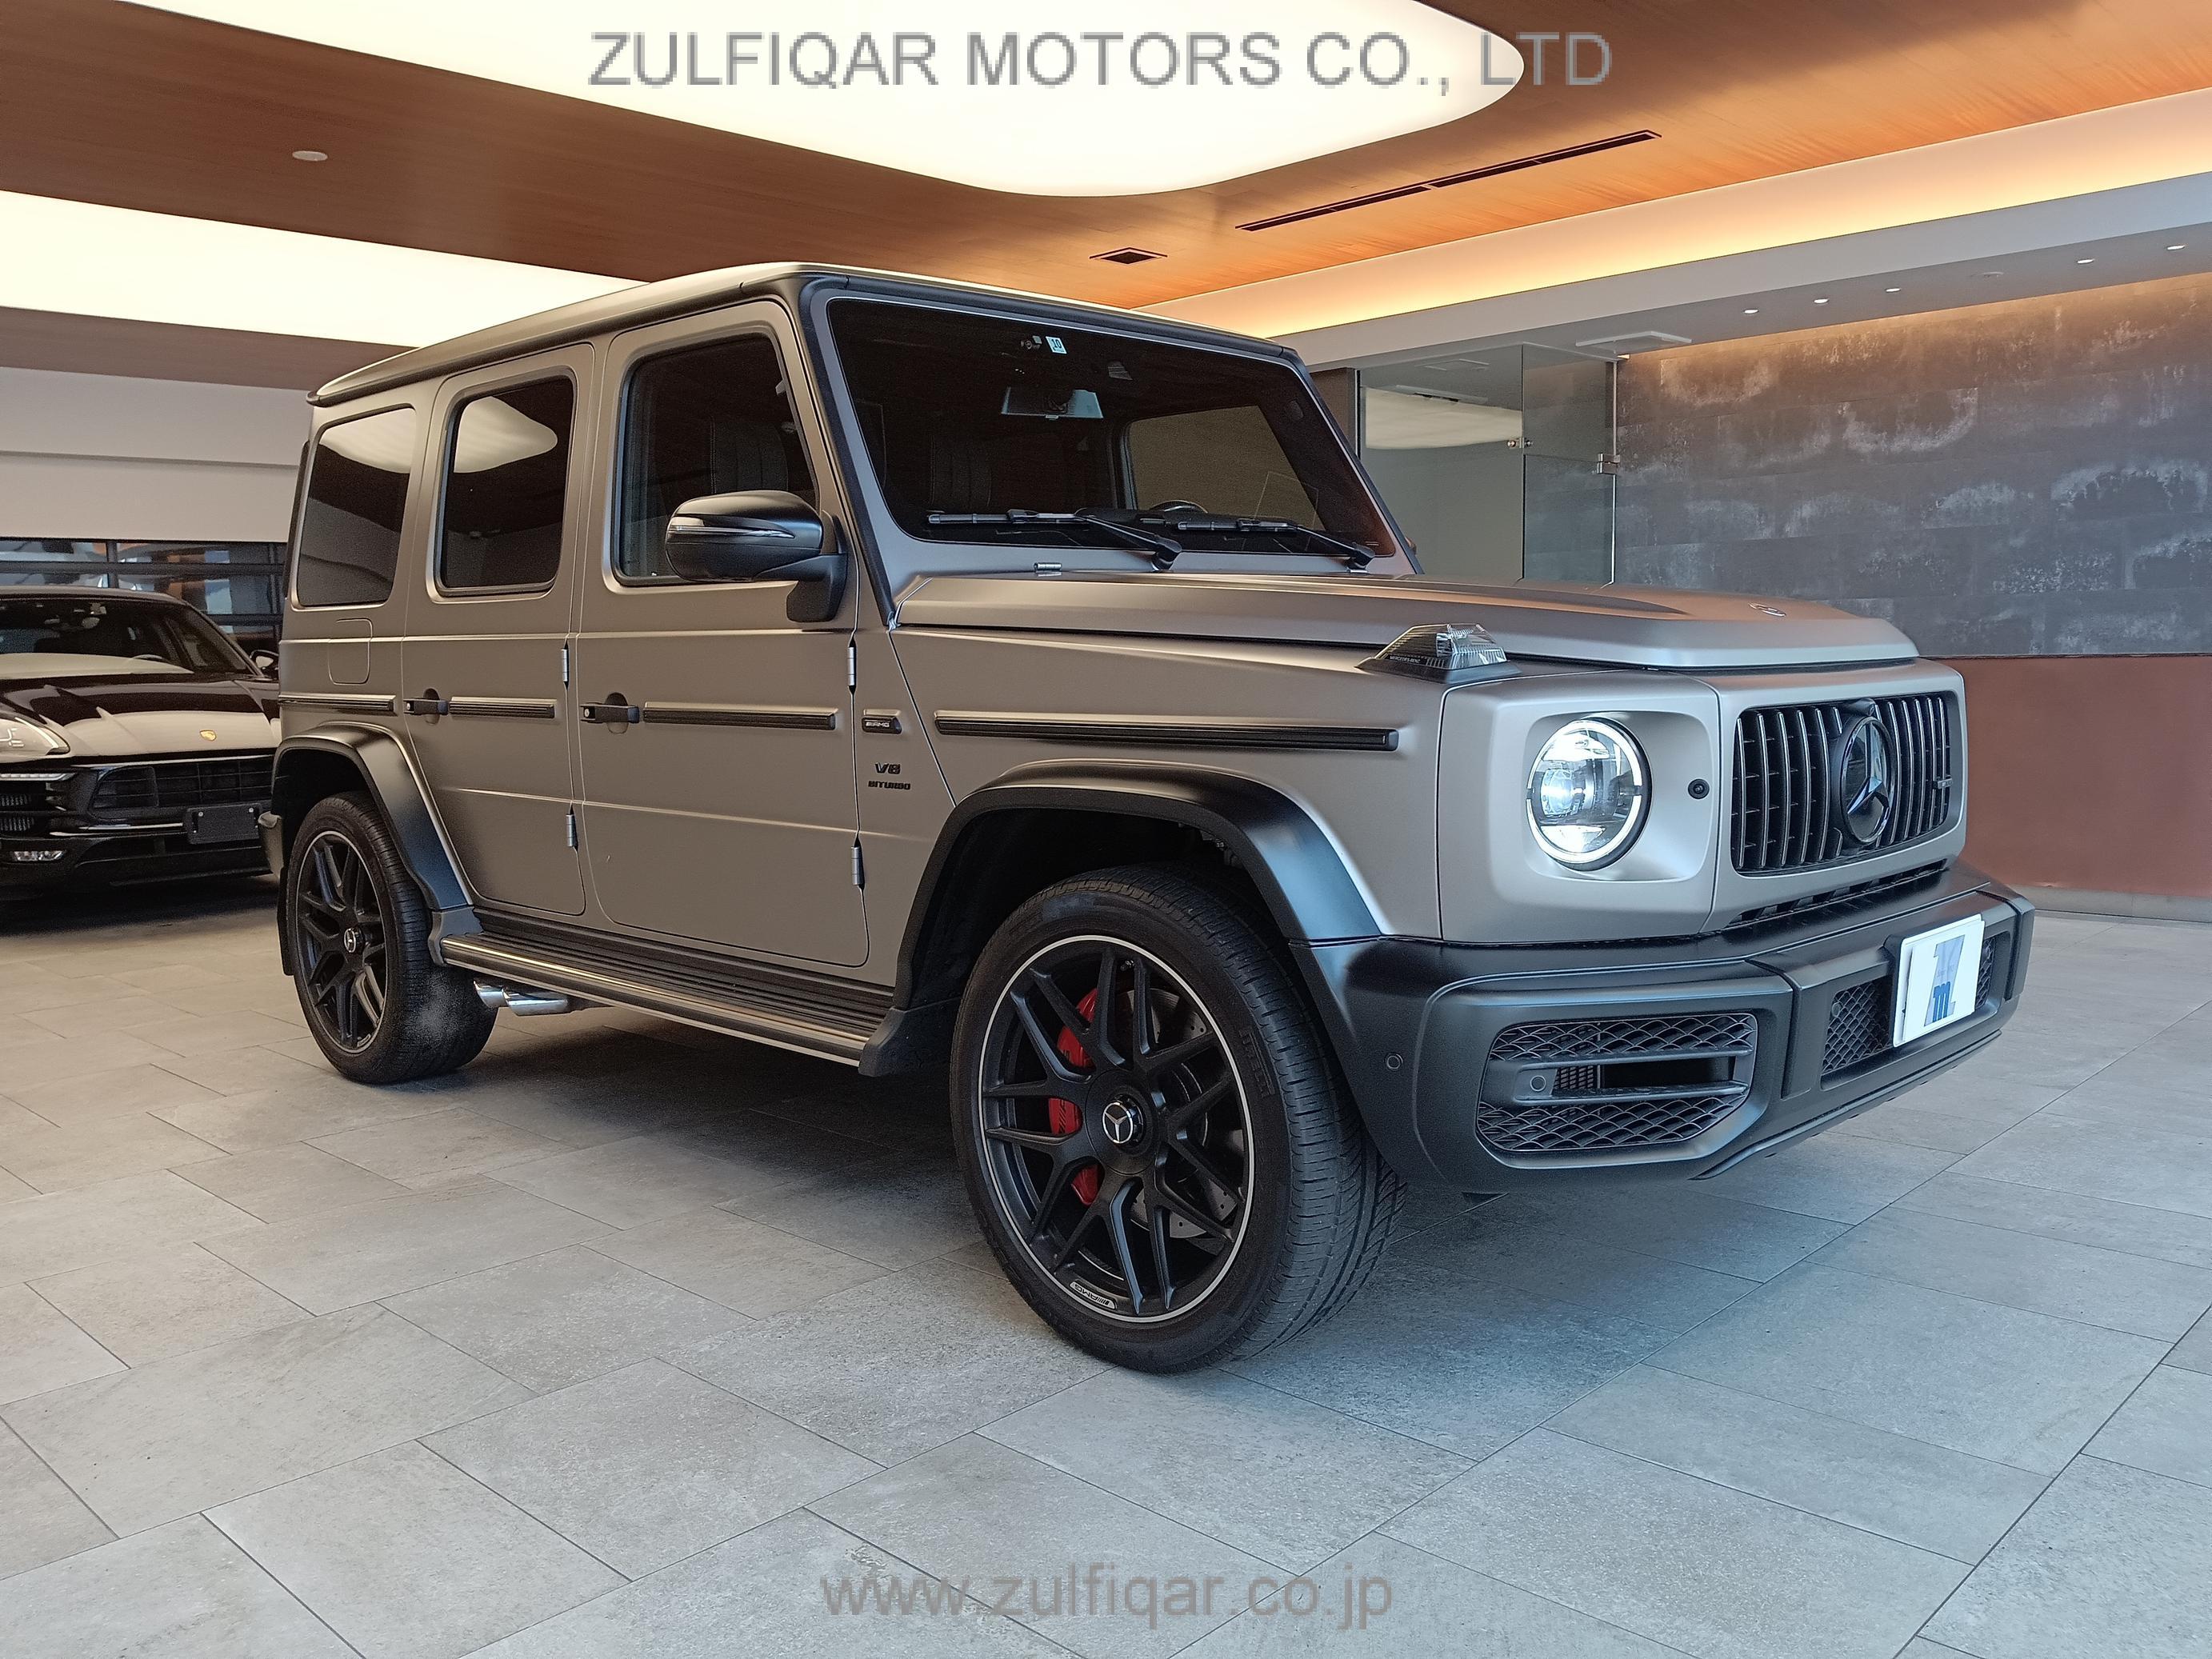 MERCEDES AMG G CLASS 2021 Image 7